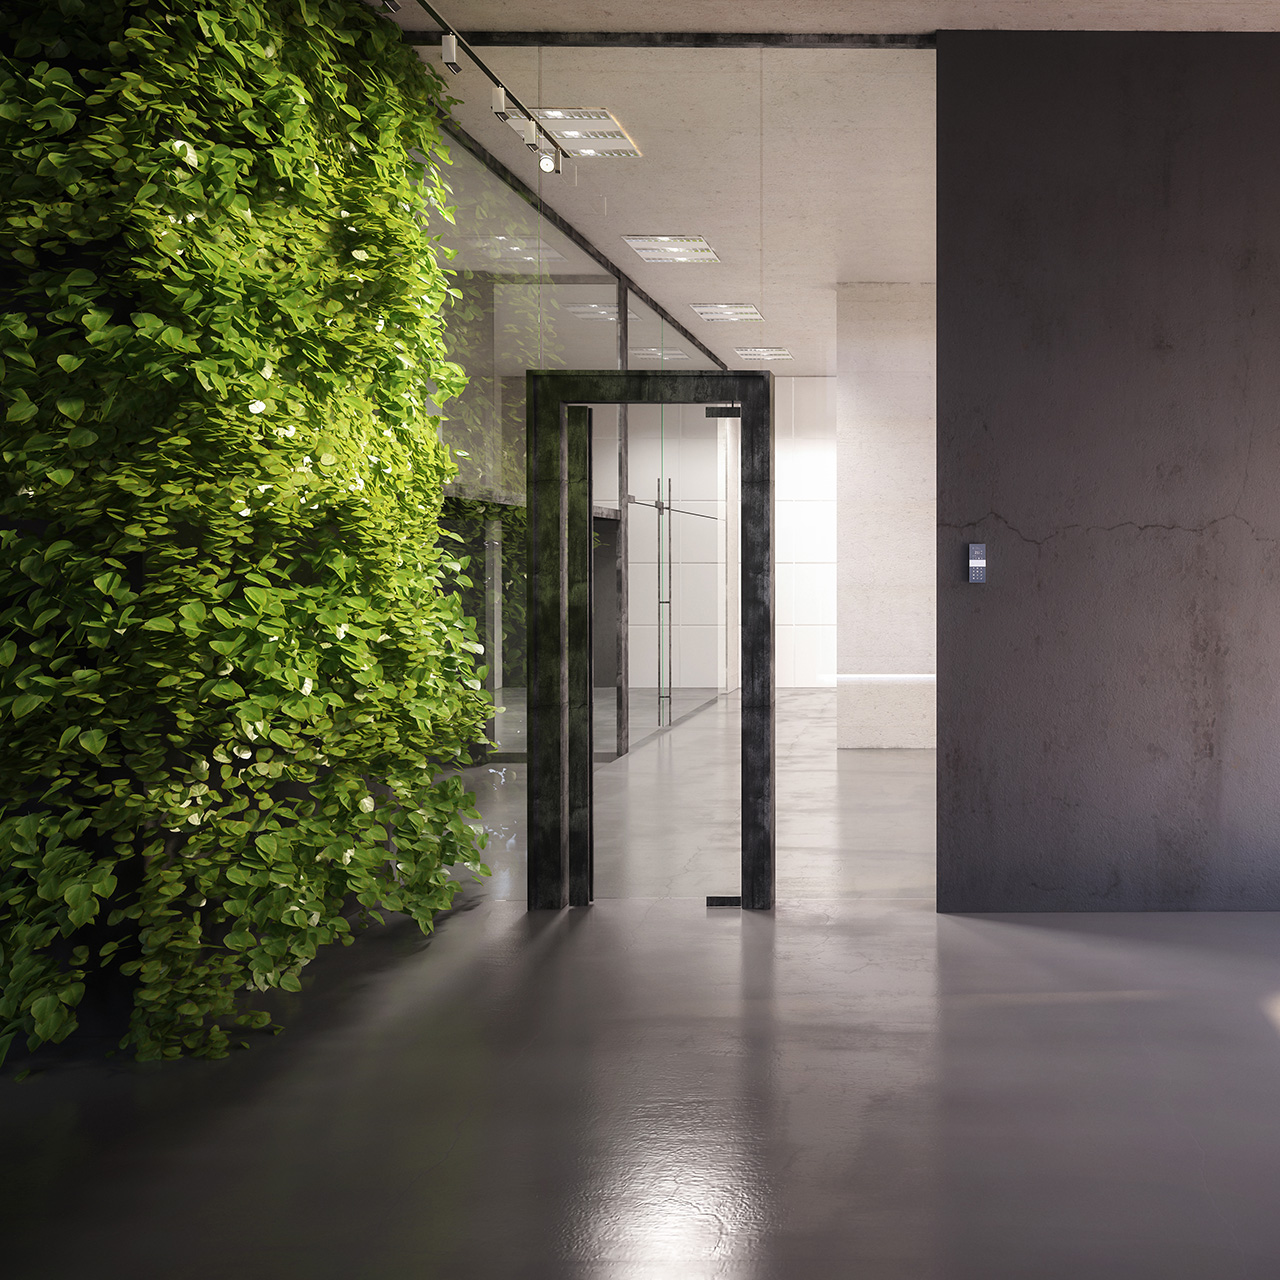 Zilker Point Well-lifestyle Excellence - Biophilic Design